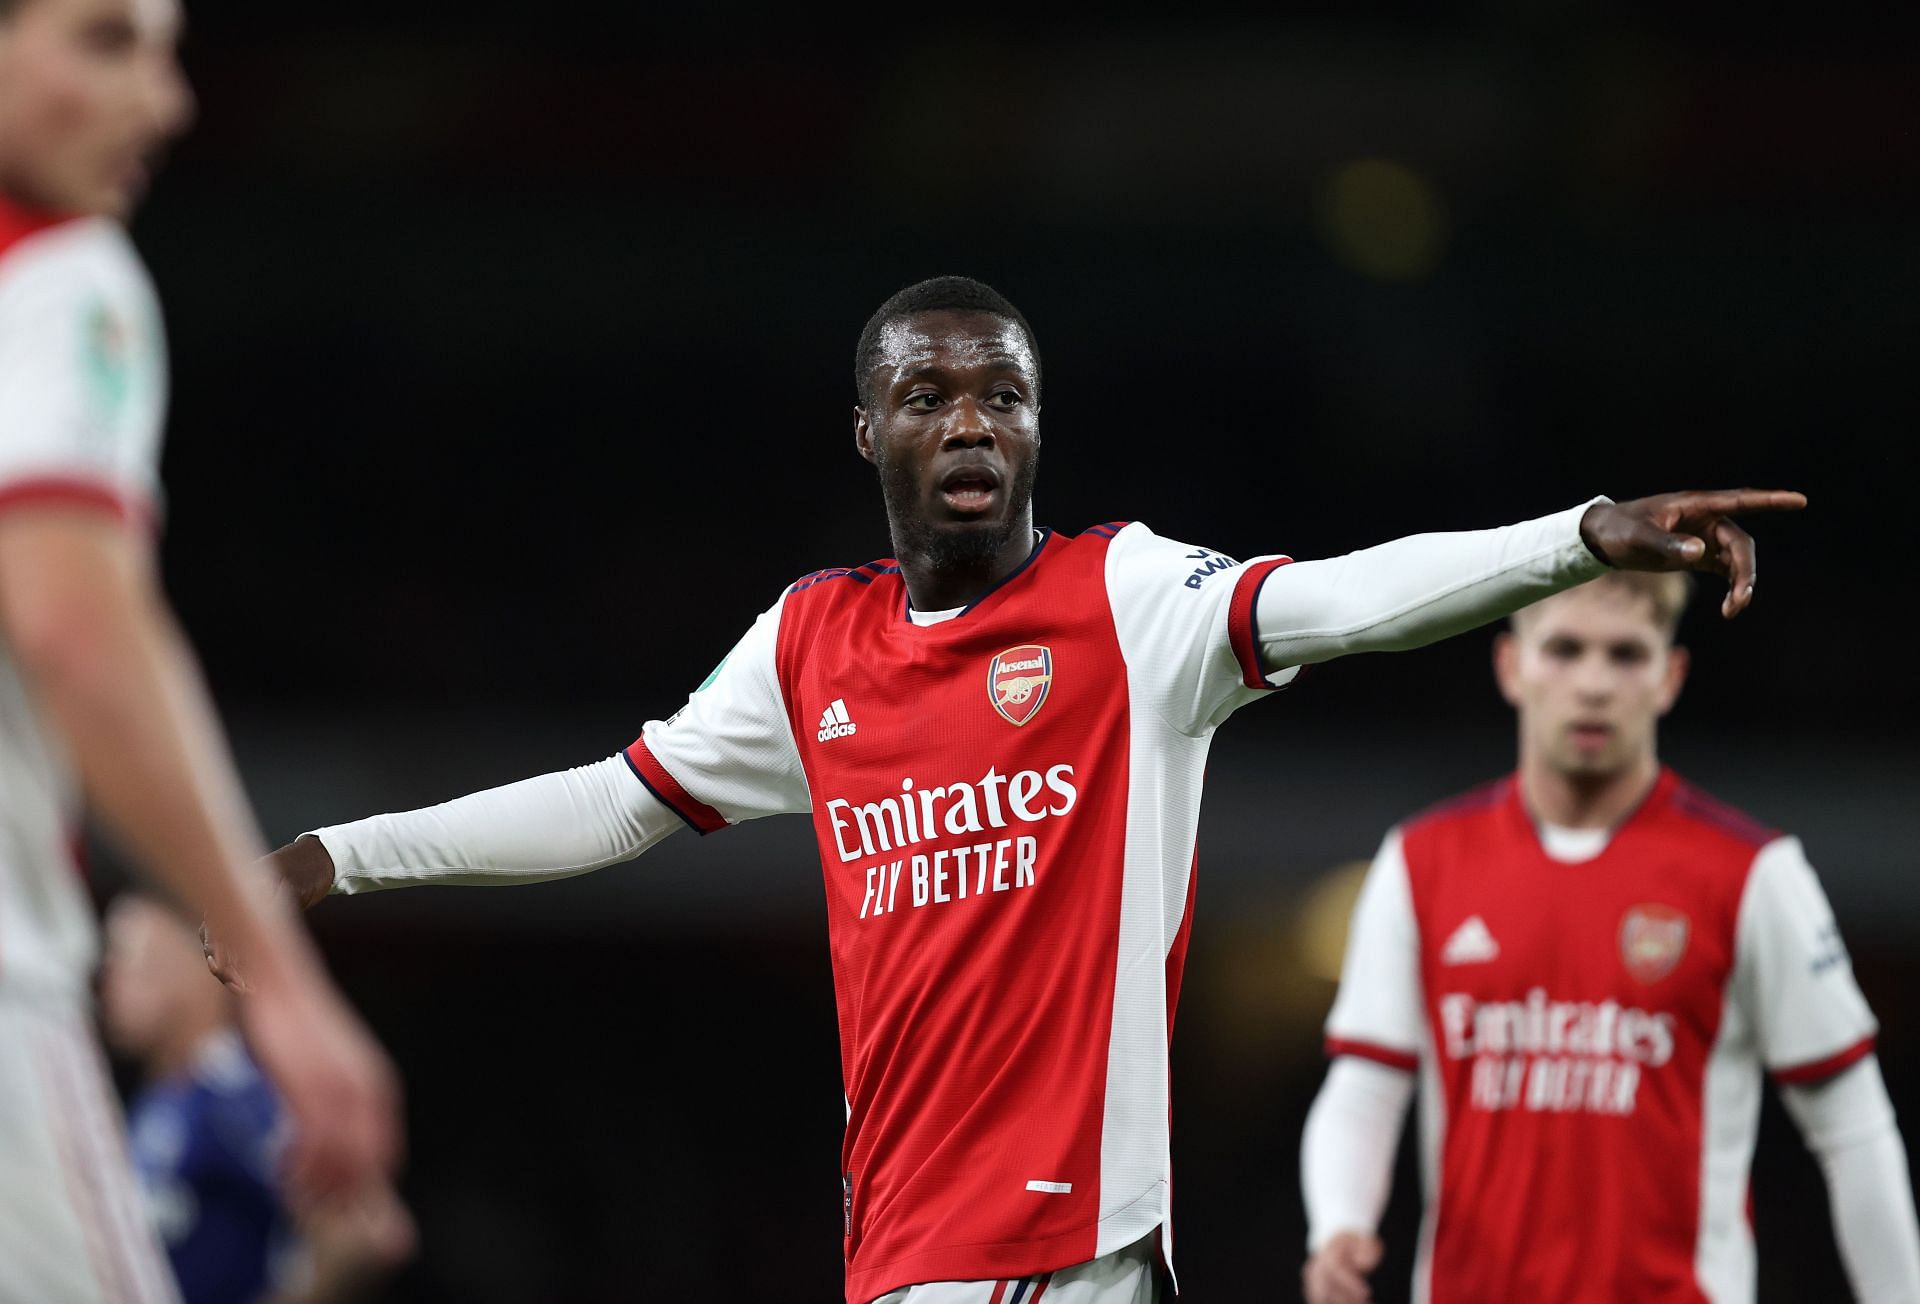 Arsenal are preparing to offload Nicolas Pepe in January.